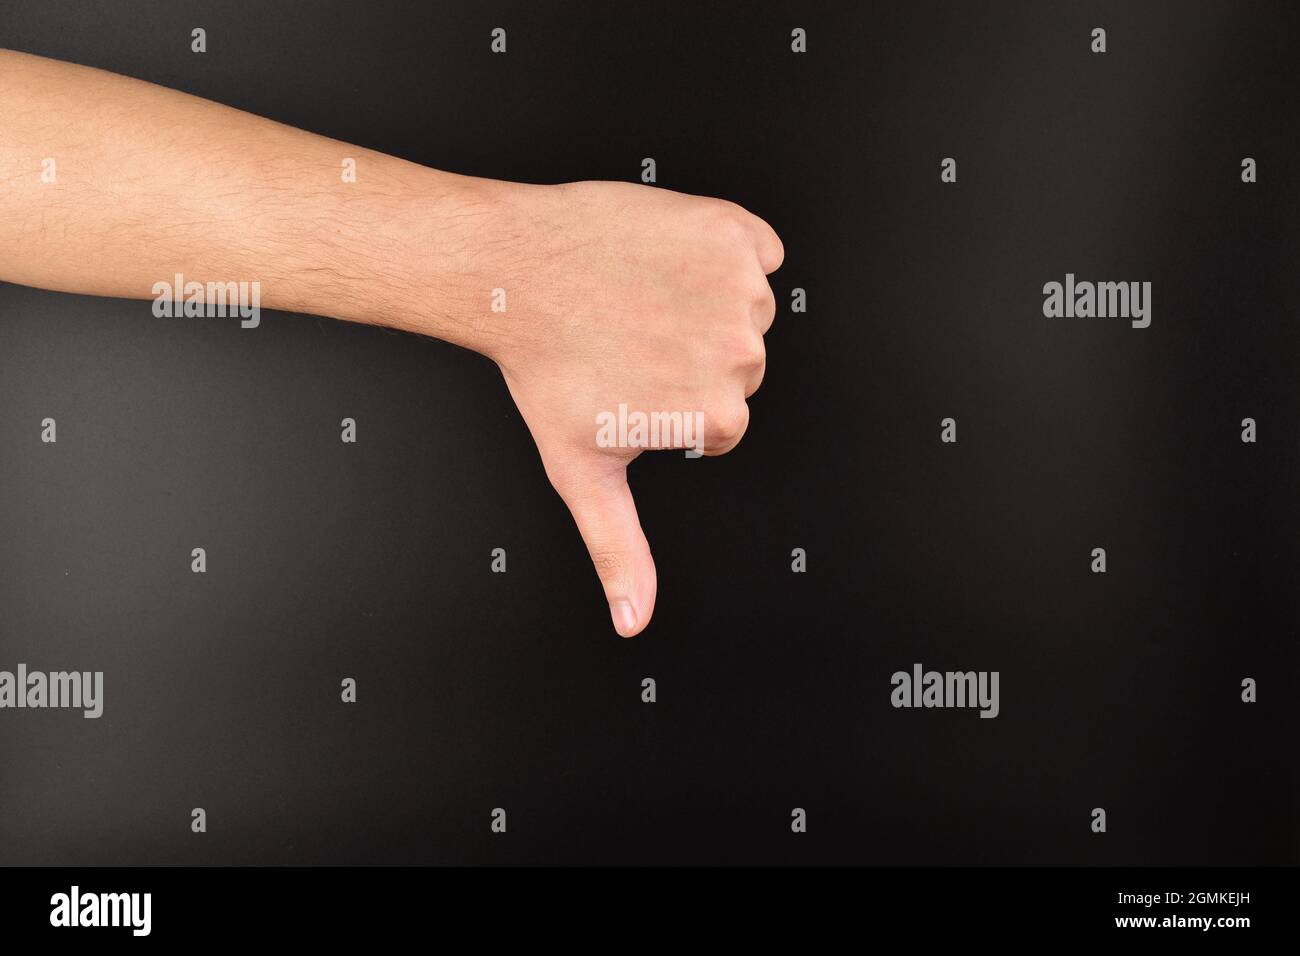 hand showing thumbs down gesture on dark background Stock Photo